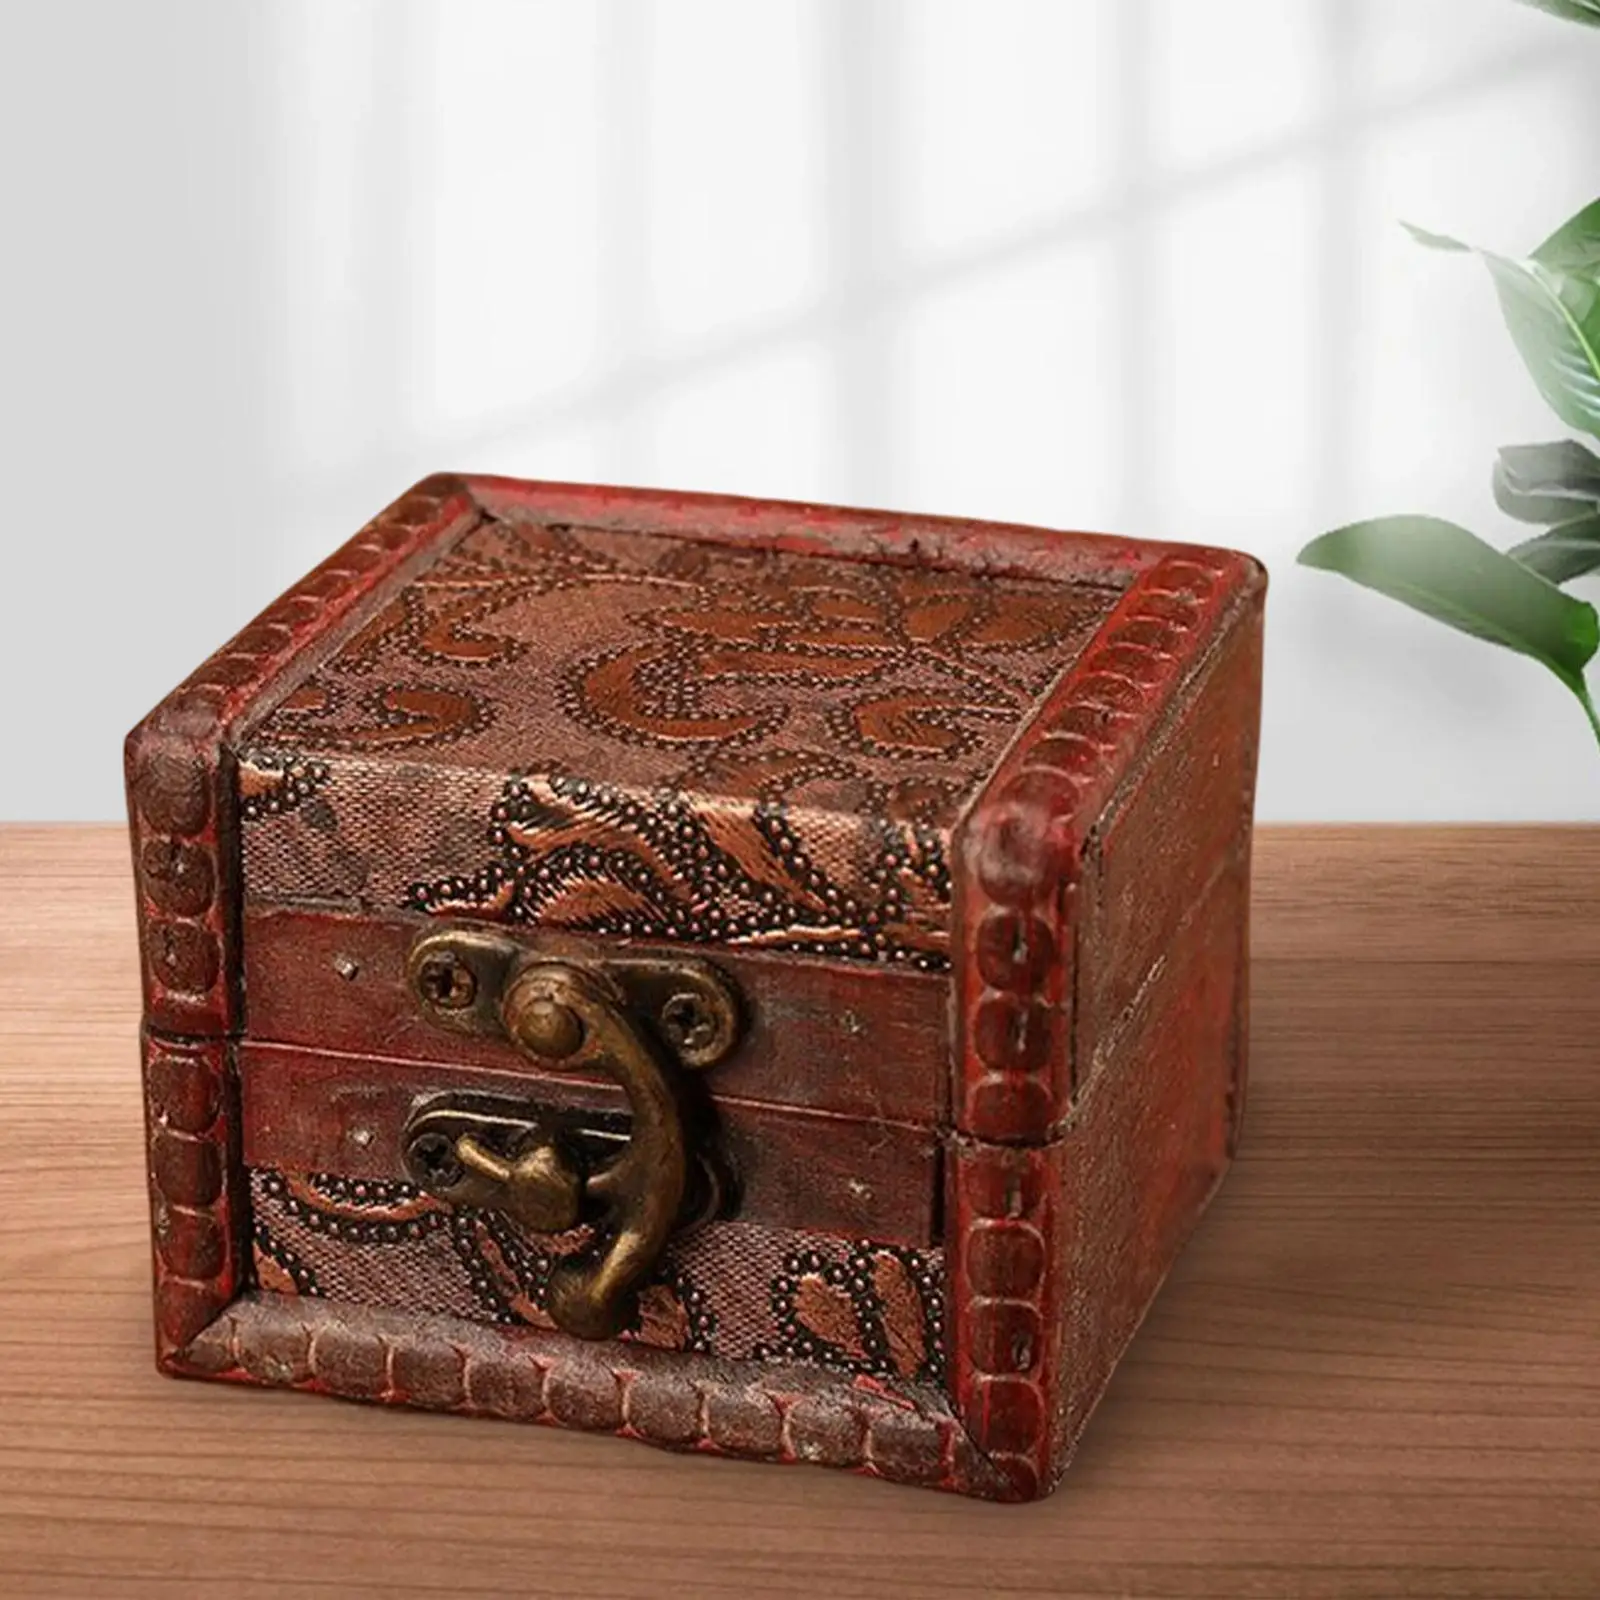 Vintage Wooden Jewelry Box Lockable Storage Case Jewellery Trinket Box for Necklaces Jewelry Ear Studs Ring Home Decoration